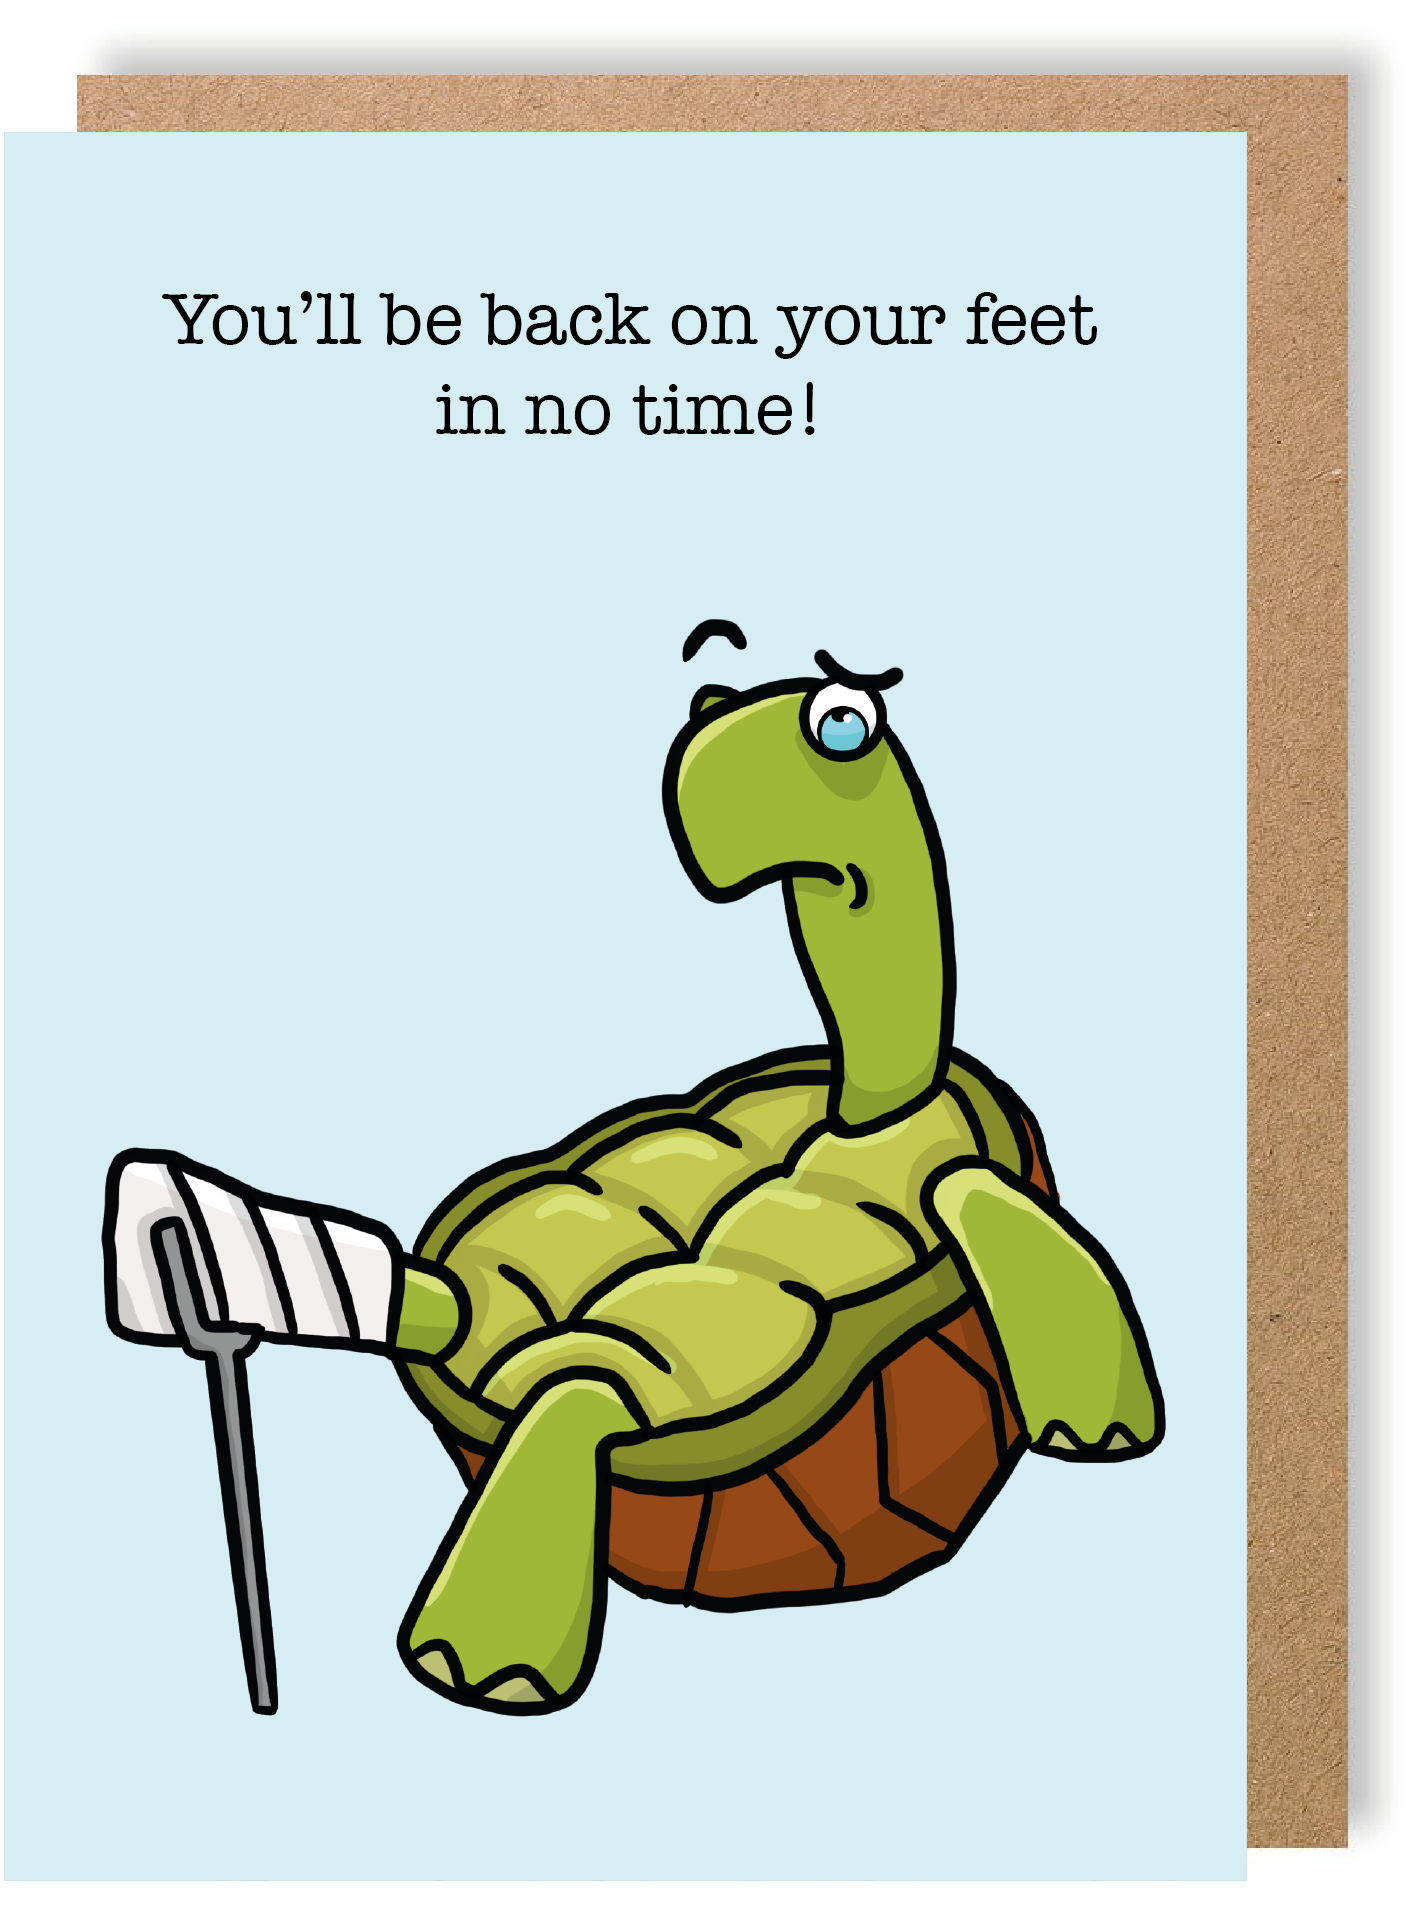 You'll Be Back On Your Feet In No Time! - Turtle - Greetings Card - LukeHorton Art